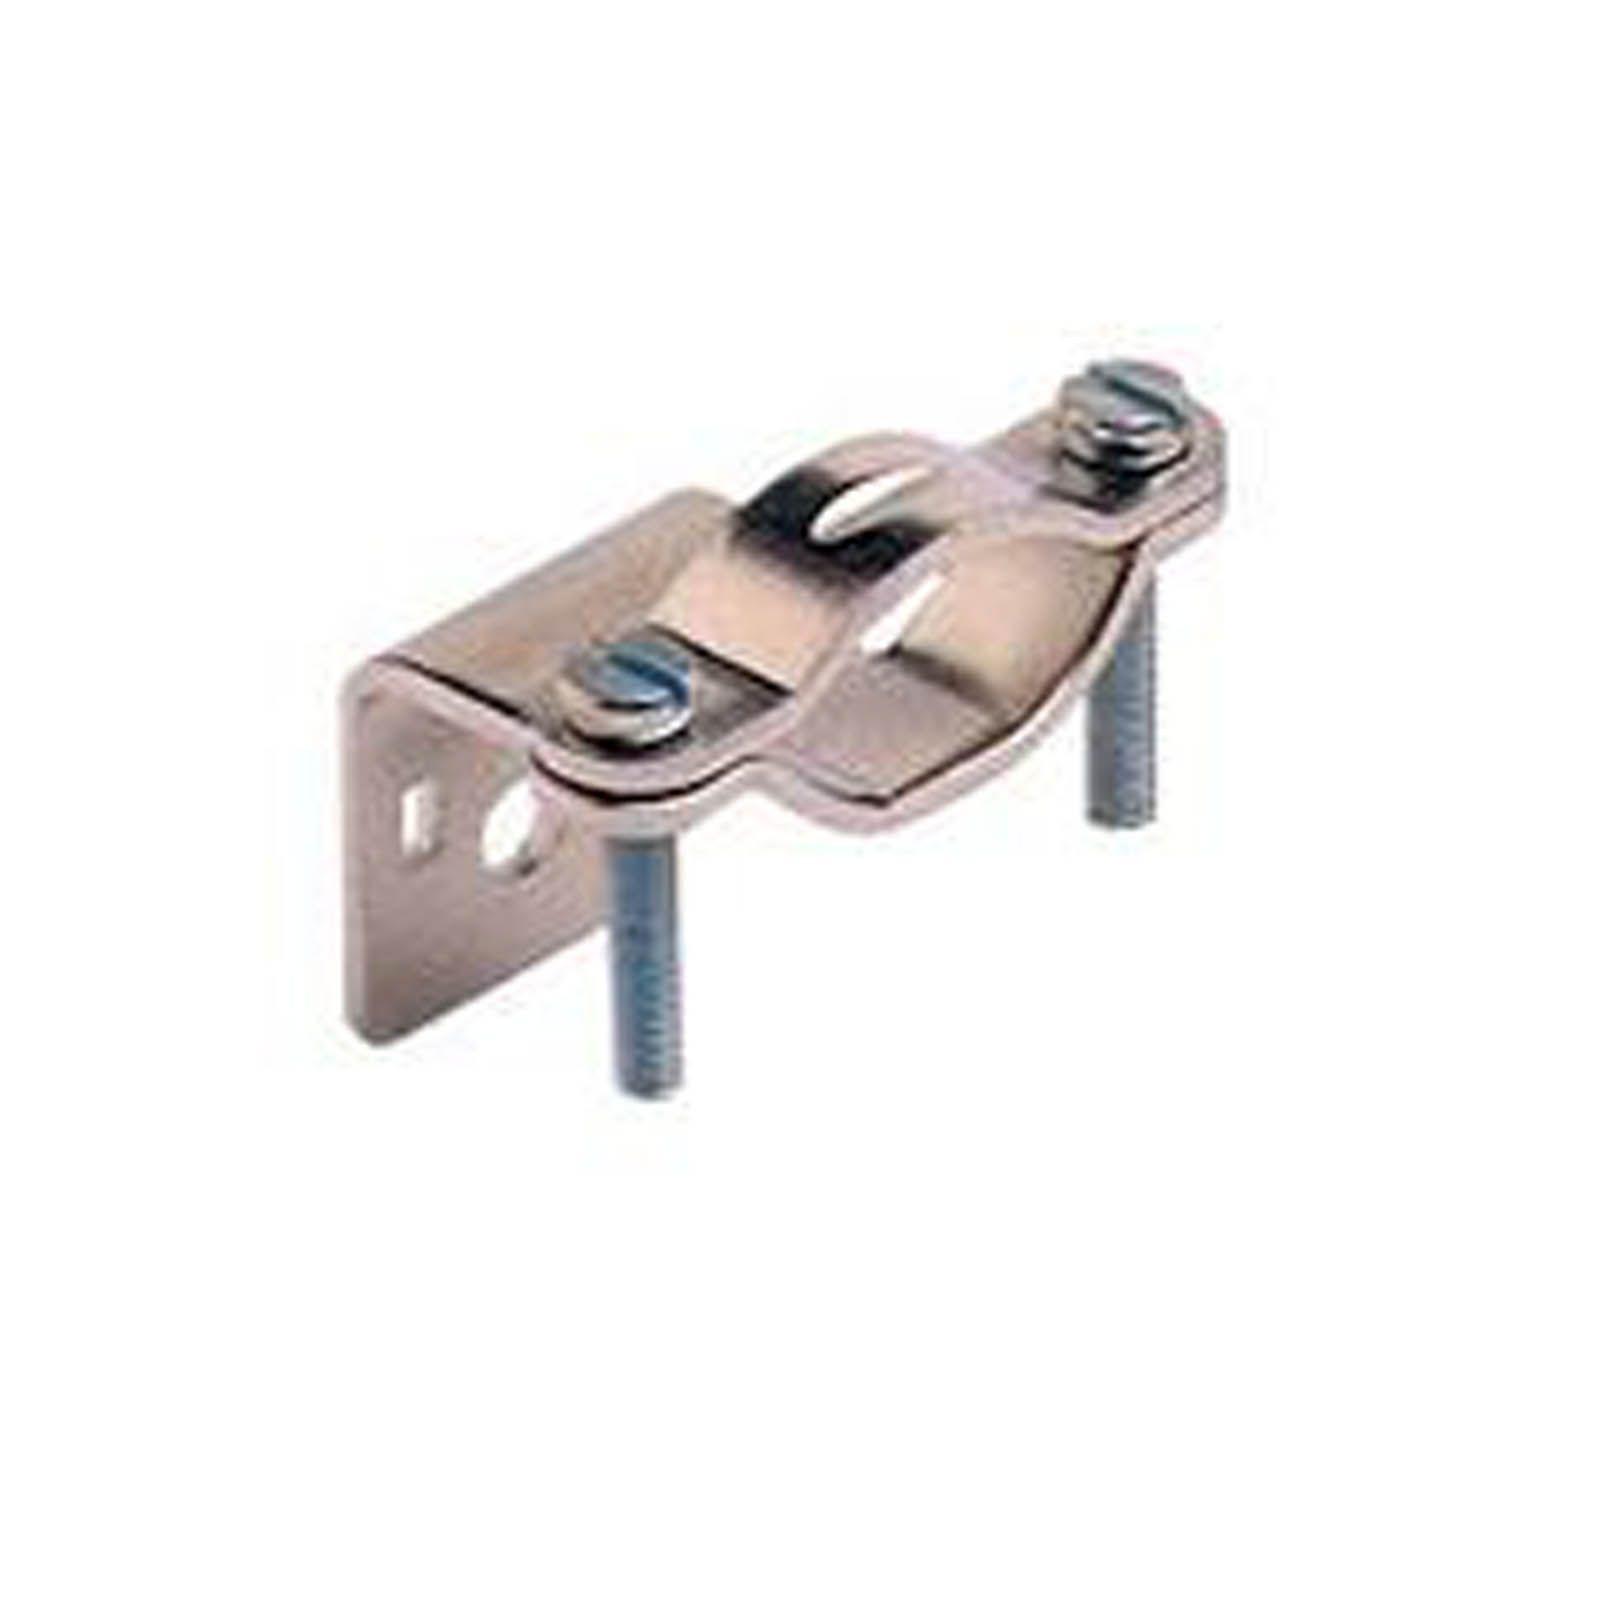 Mencom CRAS R/A Cable Clamping Plate for DIN rail Mounted Inserts